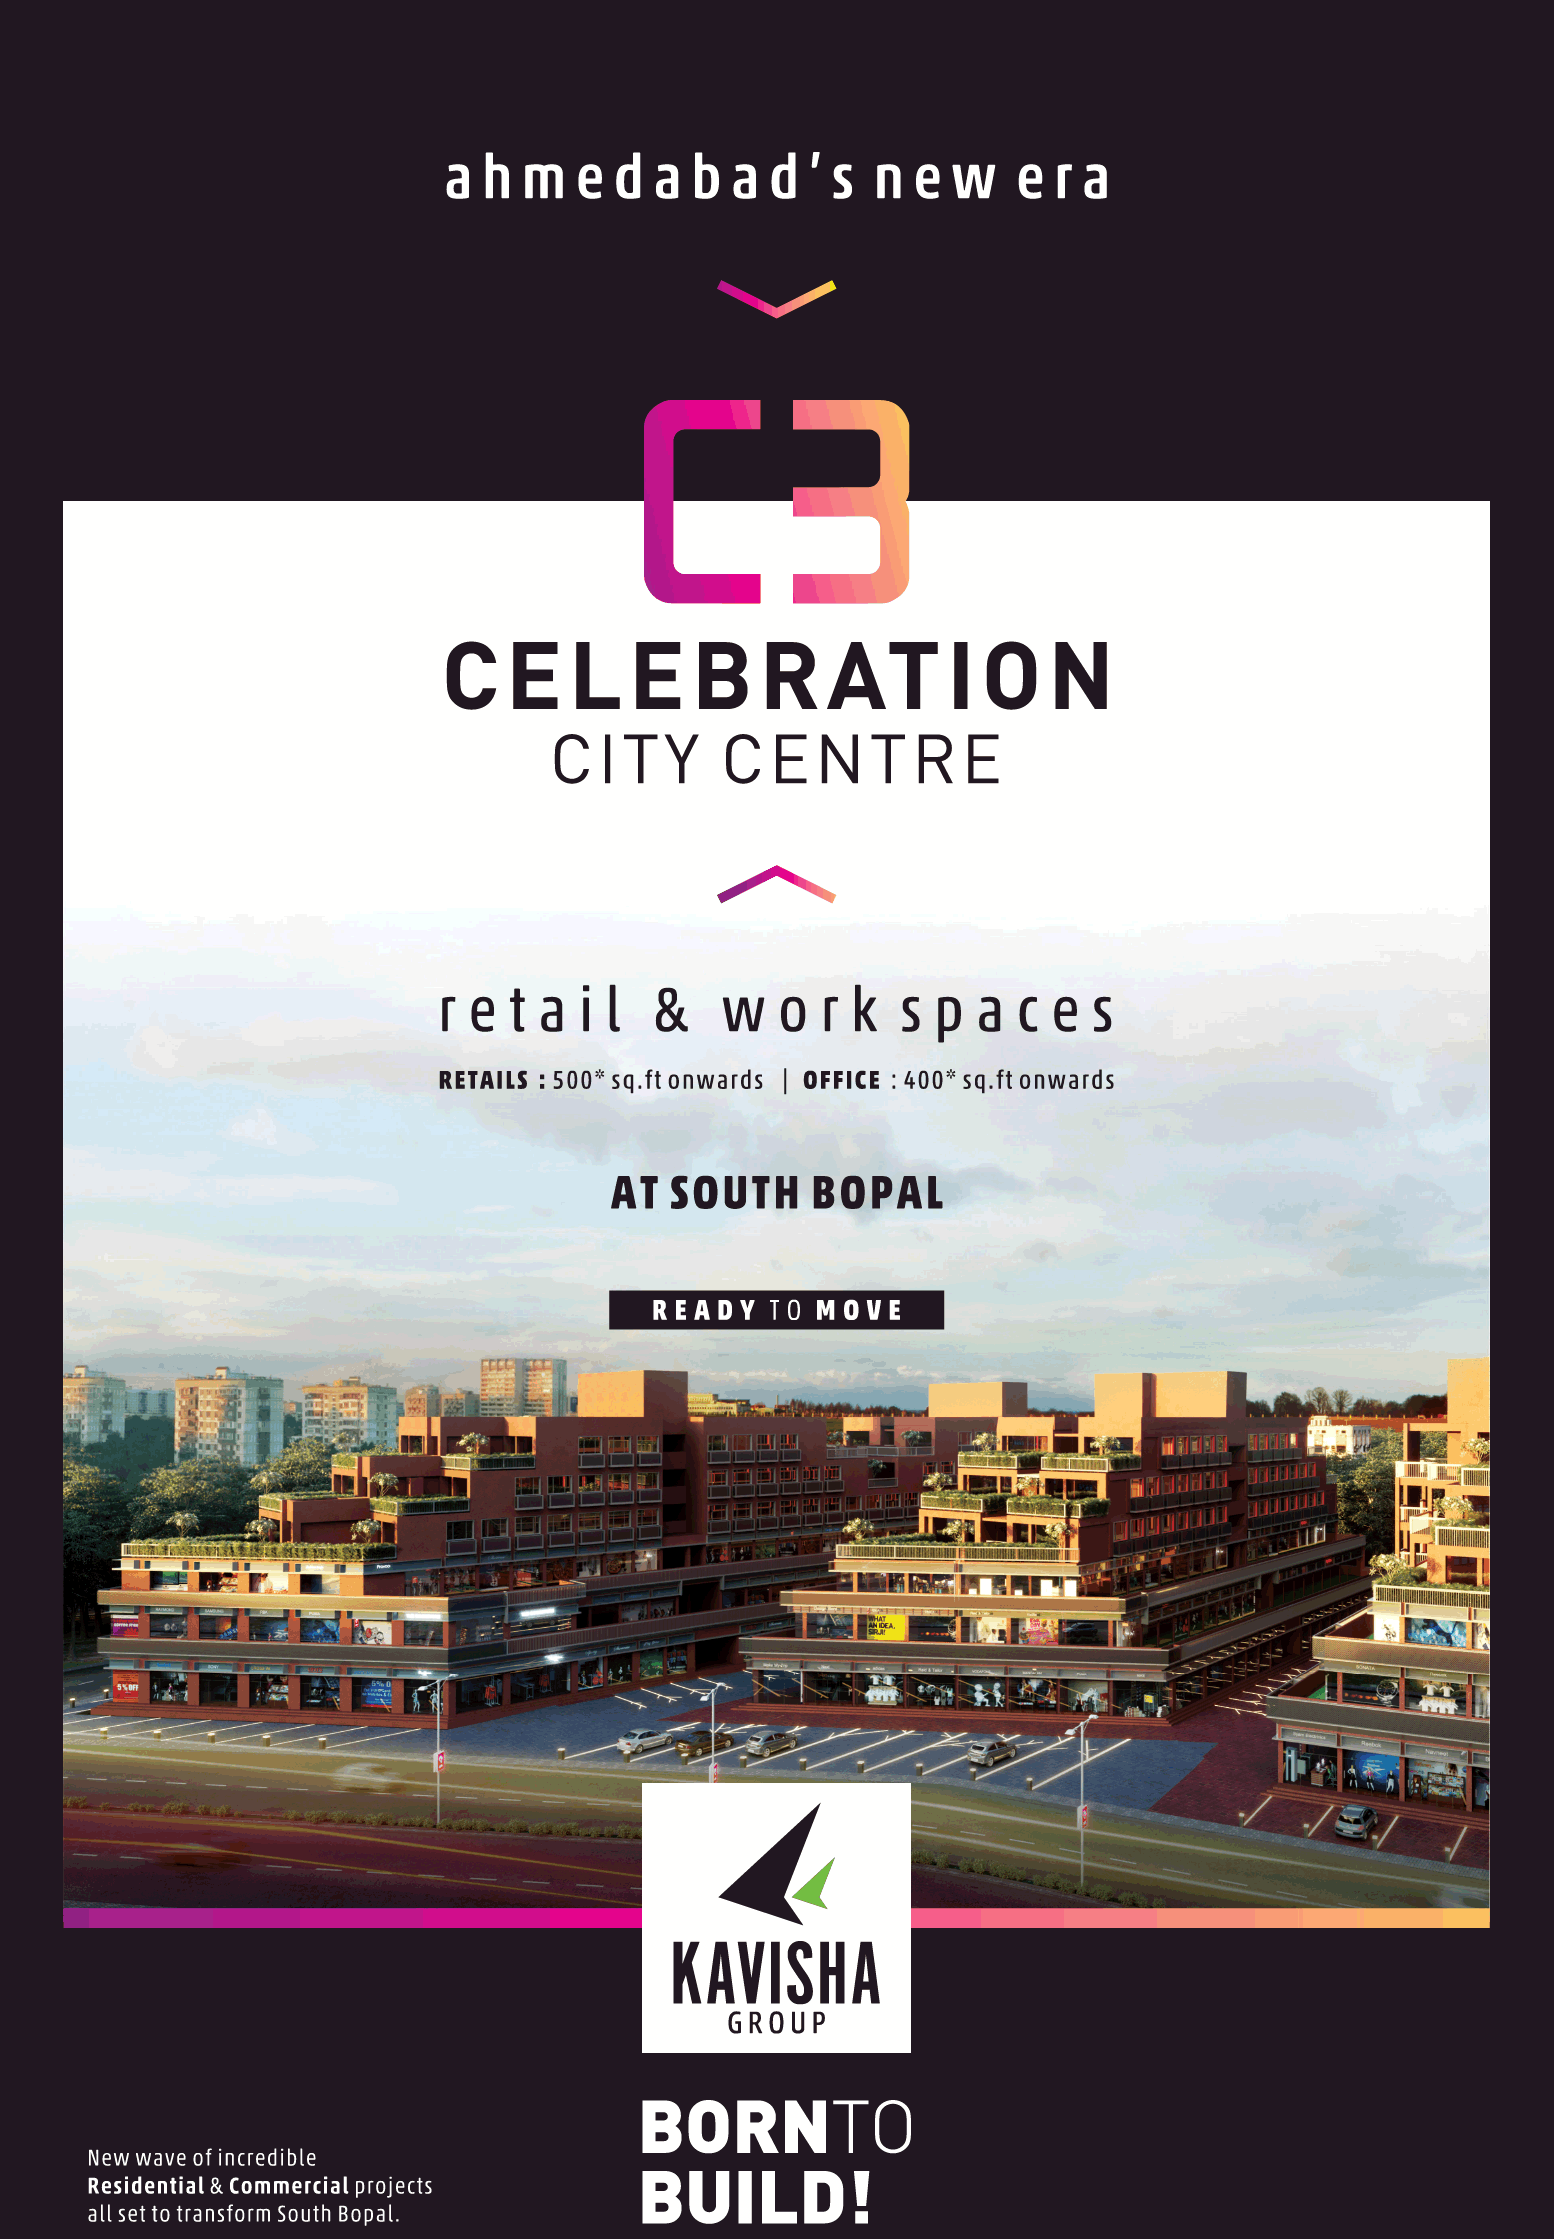 Avail retail & work spaces at Kavisha Celebration City Centre in South Bopal, Ahmedabad Update